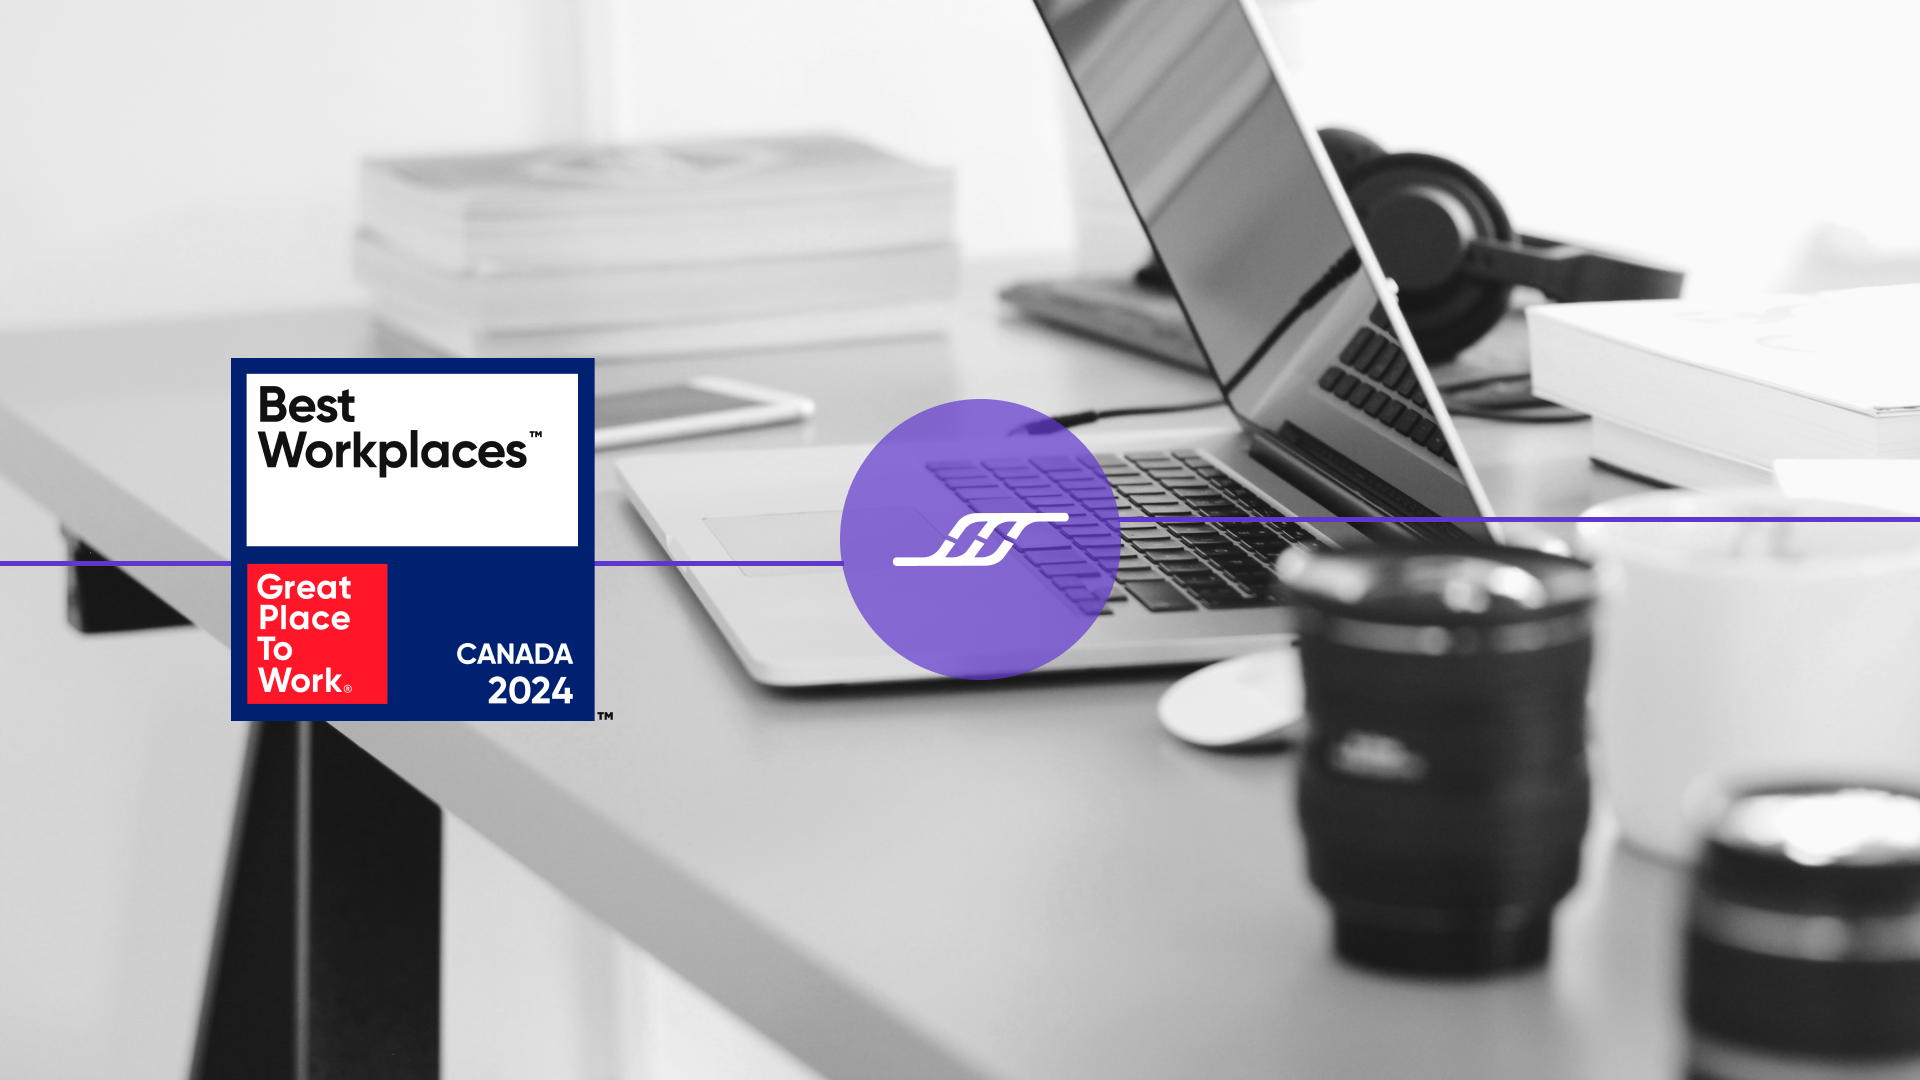 Infostrux Named One of the Best Workplaces™ in Canada for 2024!